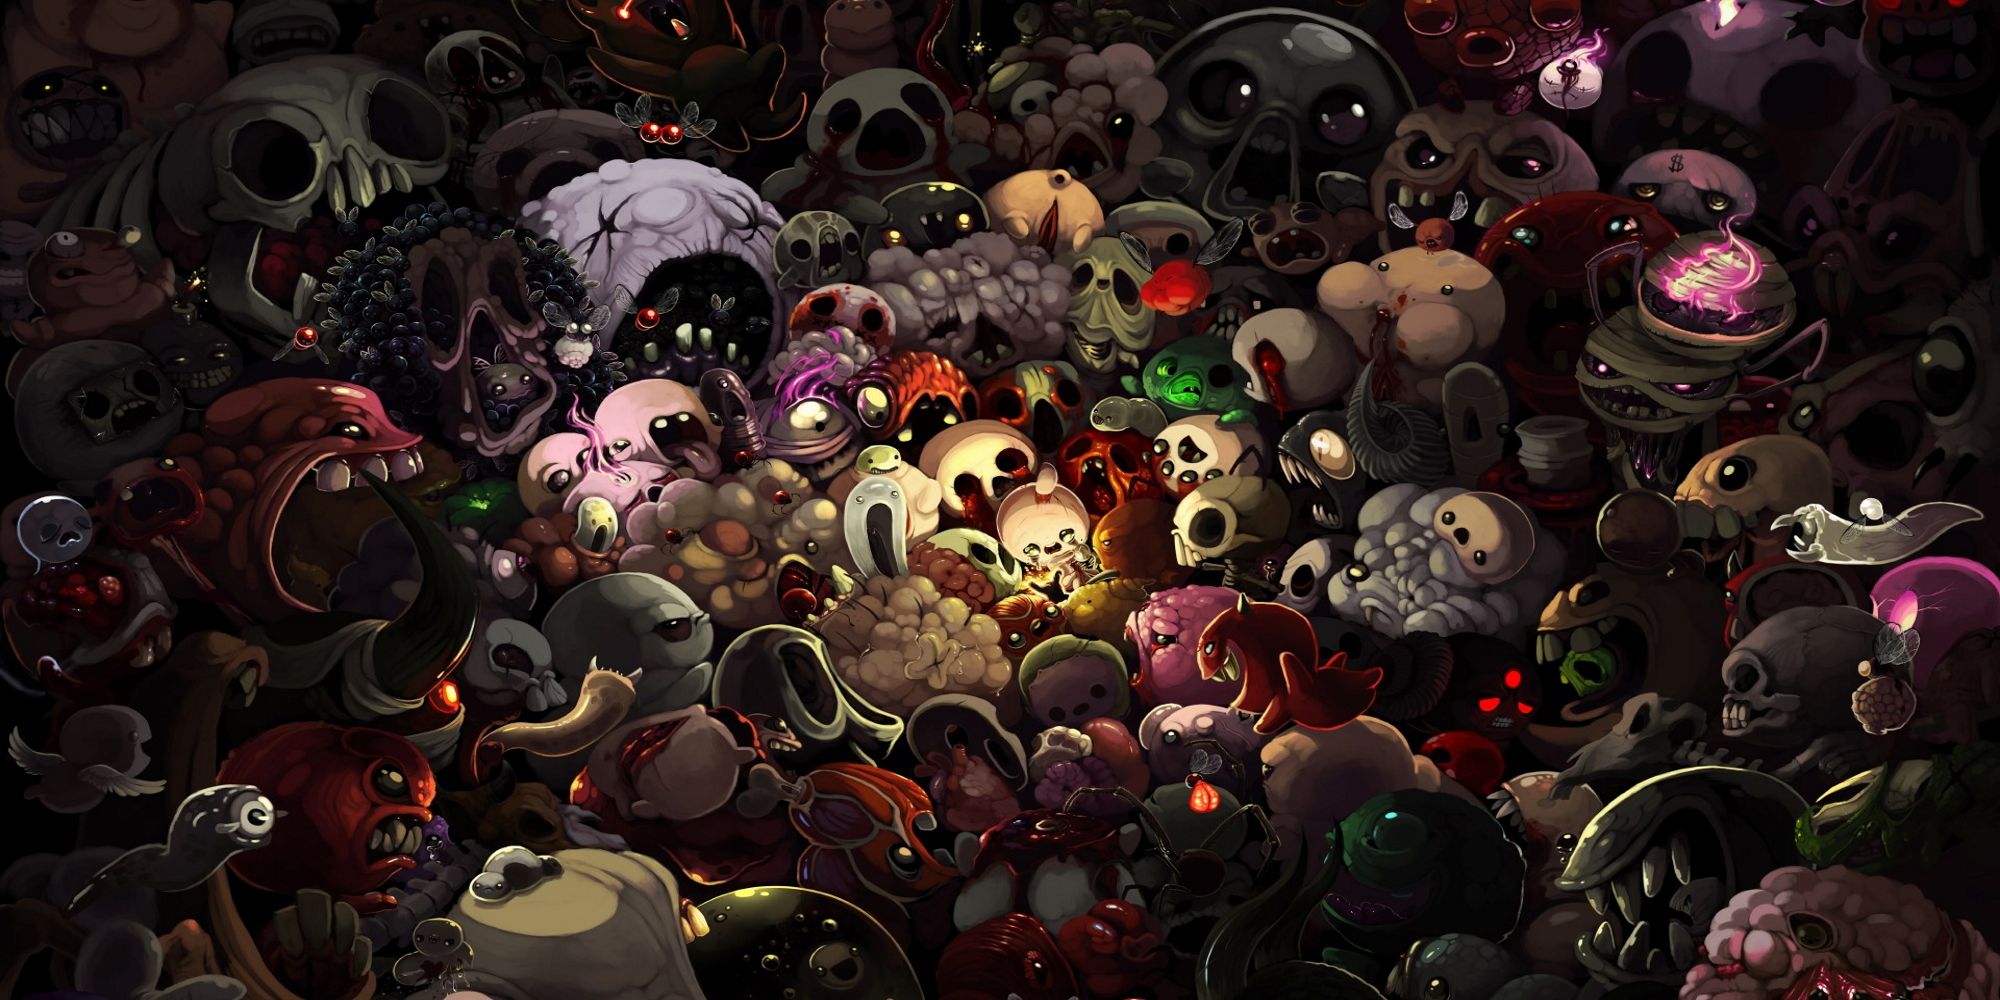 Isaac curled up with dozens of enemies crowded around him, artwork